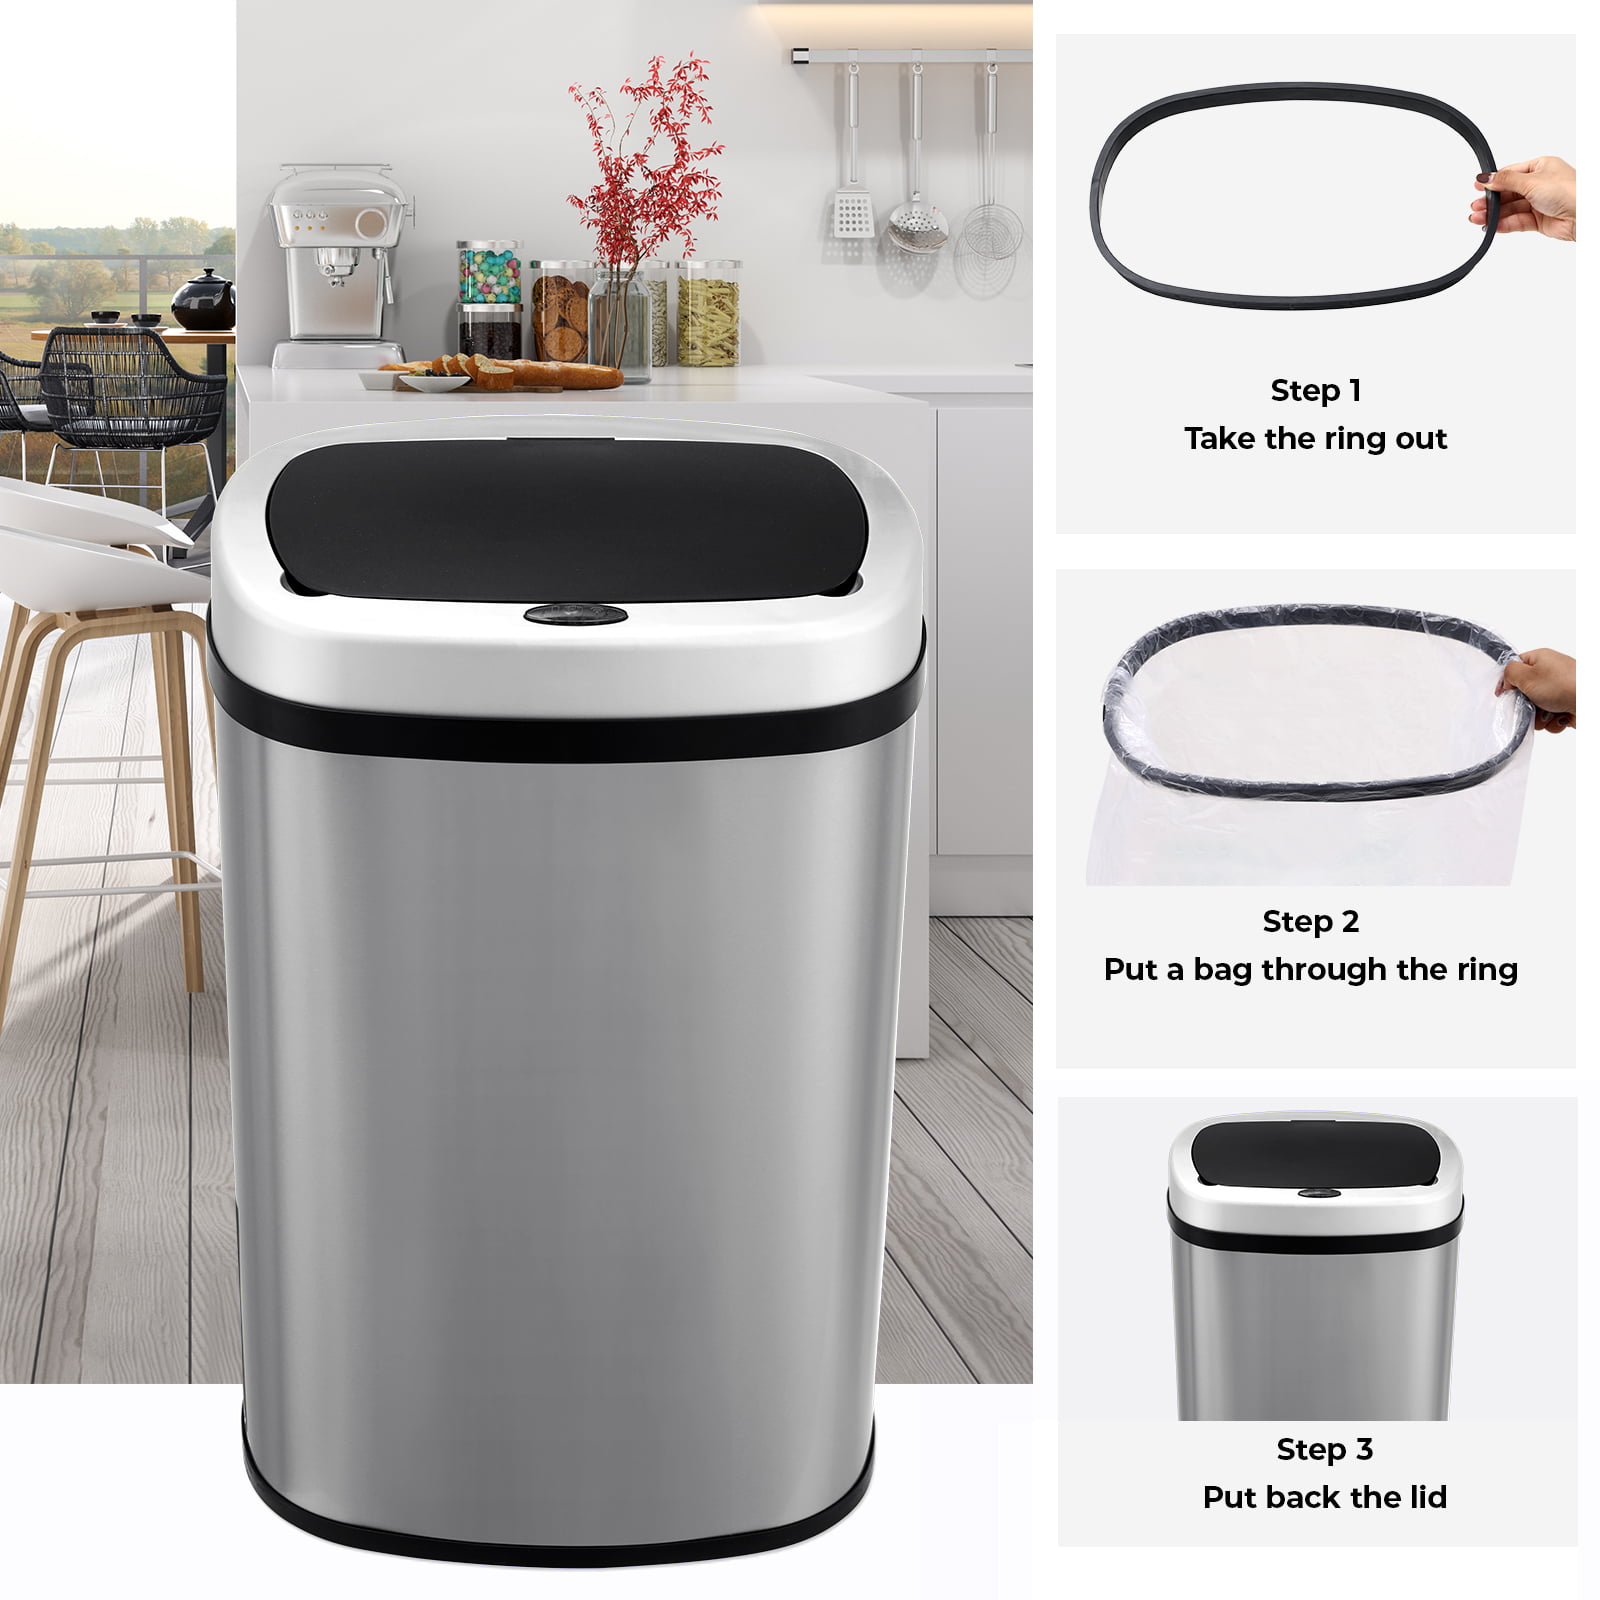 Mainstays Rectangle Pedal Bin Kitchen Garbage Can, 7.9 gal 